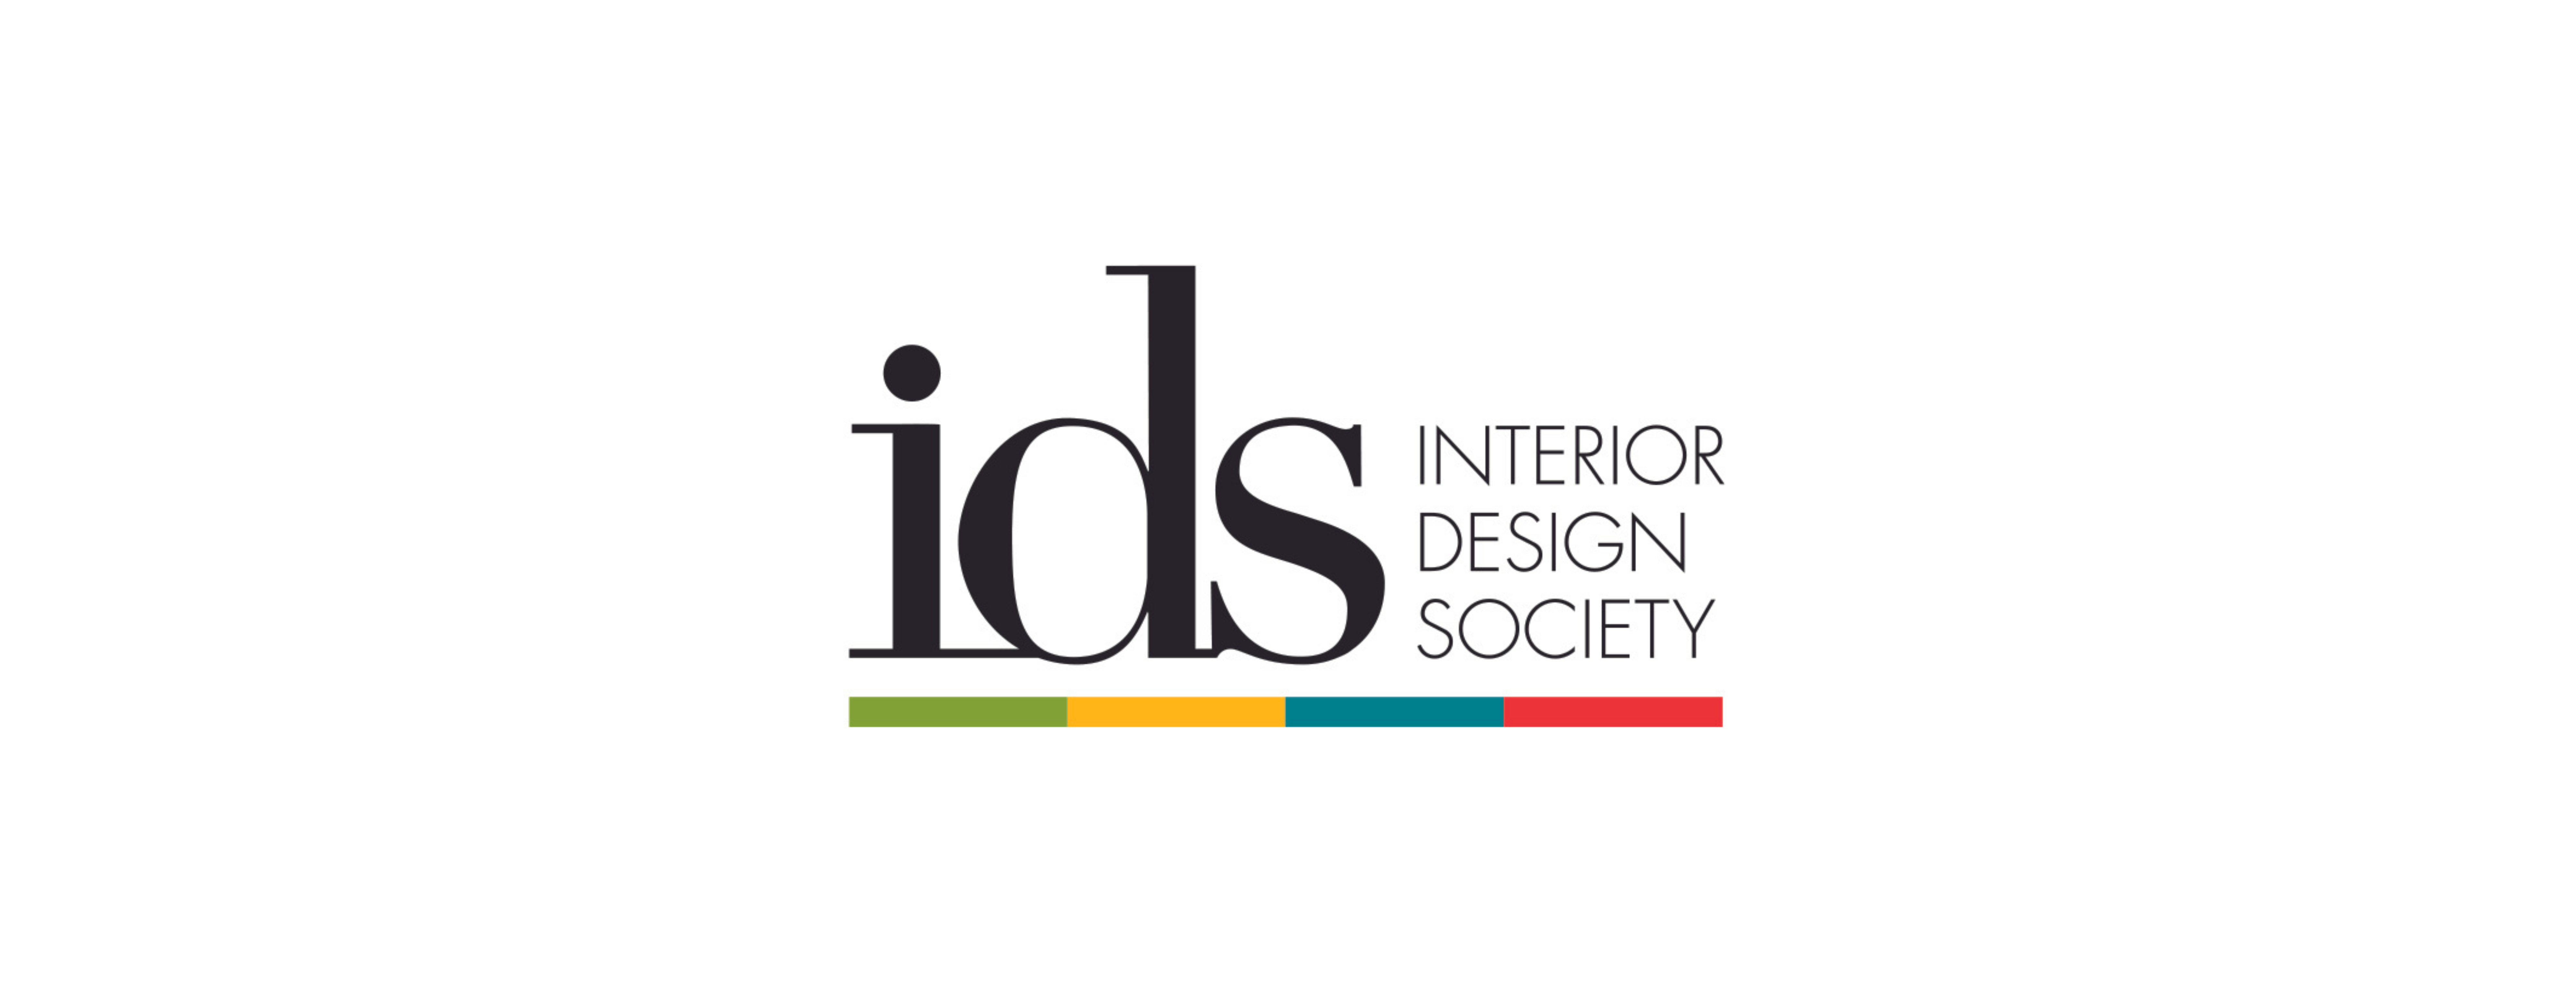 Home Technology Association Announces Collaboration with Interior Design Society (IDS)